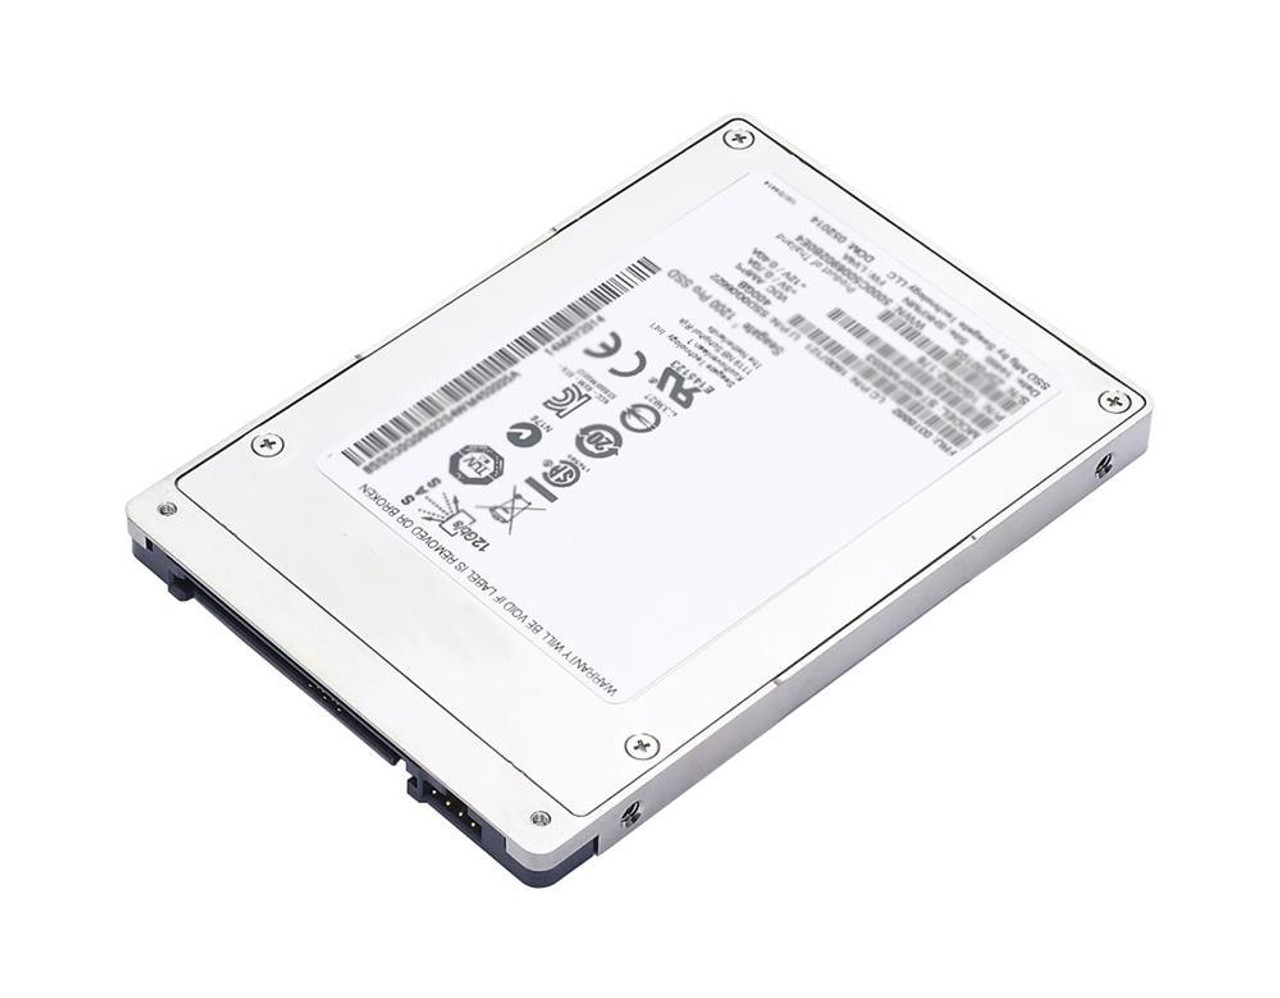 7N40E65078 Lenovo 240GB SATA 6Gbps Hot Swap 2.5-inch Internal Solid State Drive (SSD)